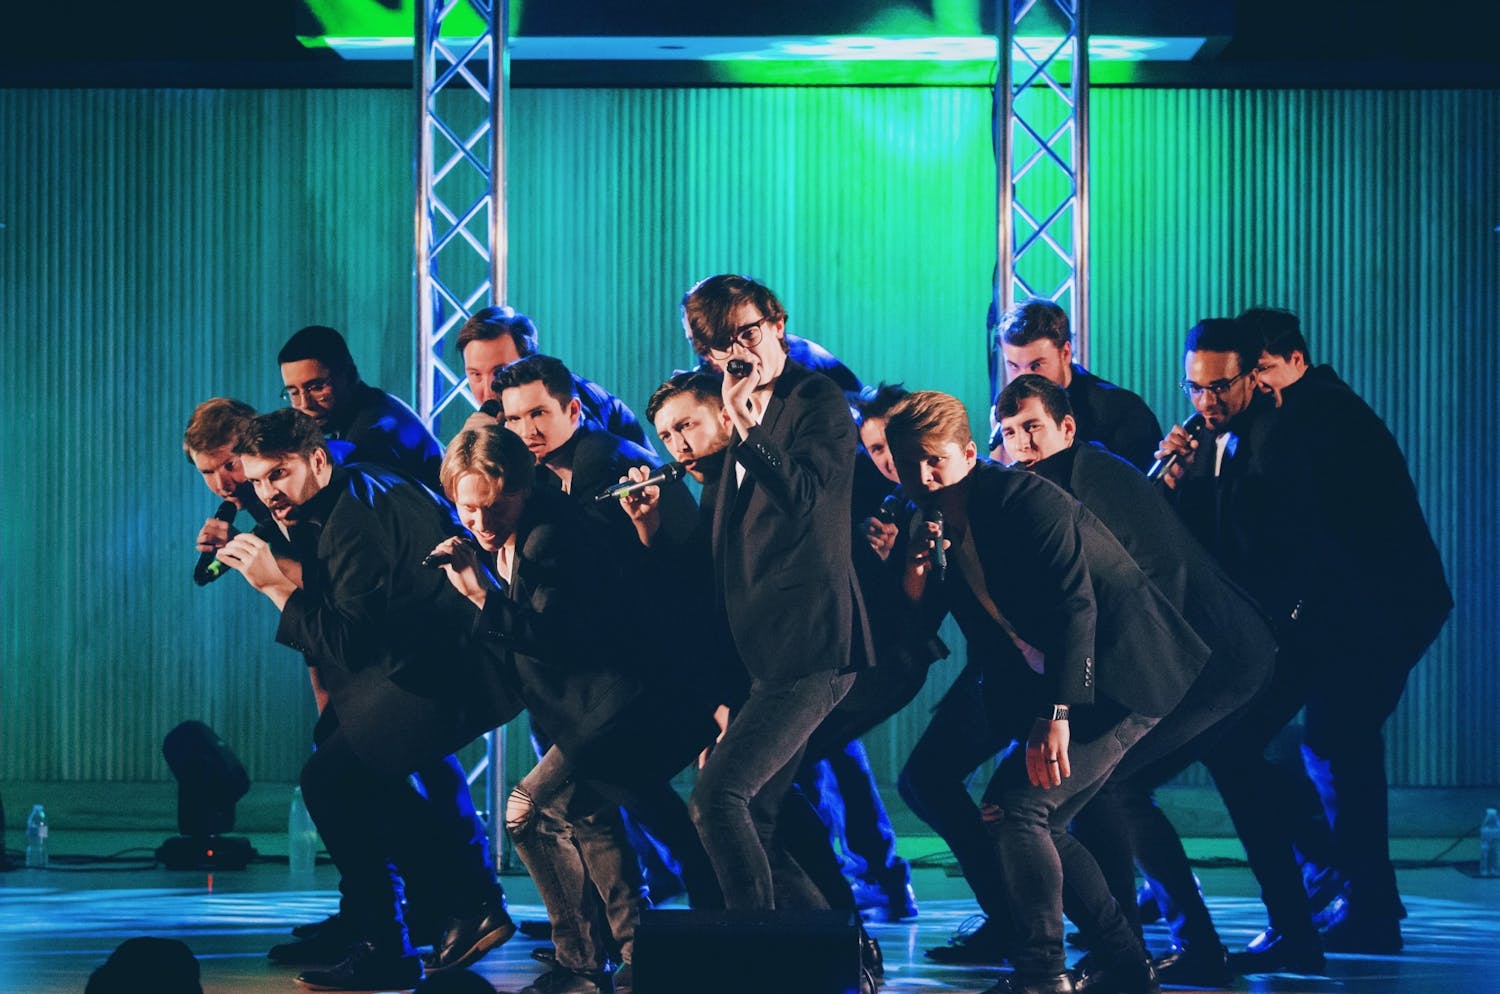 Two weeks ago, the Buffalo Chips won first place in the 2021 ICCA Central semifinals and earned awards for best arrangement, solo, vocal percussion and videography.